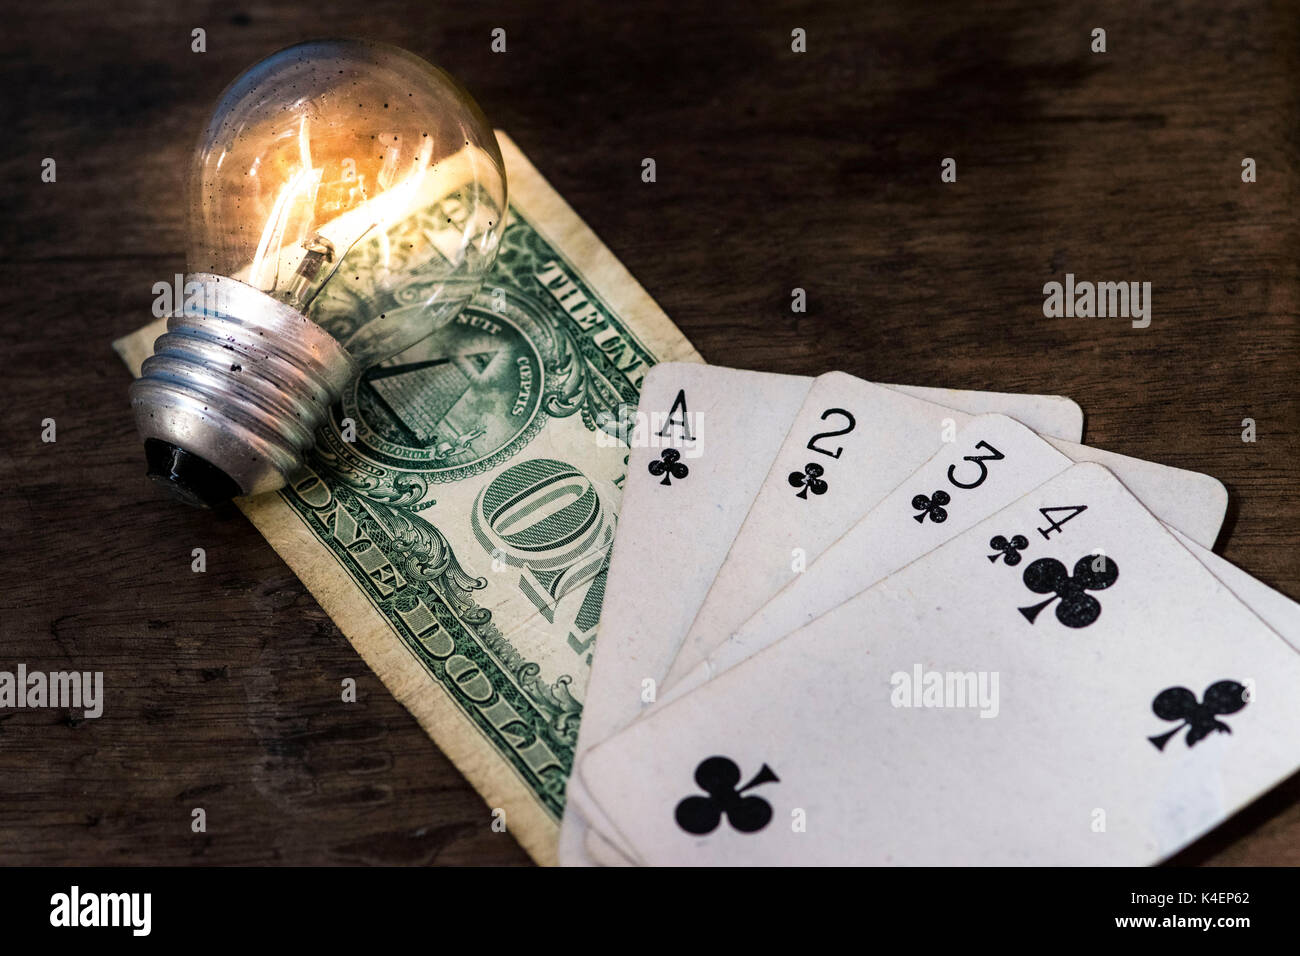 Lit light bulb, US money one dollar bill and white playing cards, face up, on top of a wooden surface, money, gambling and winning concept idea Stock Photo